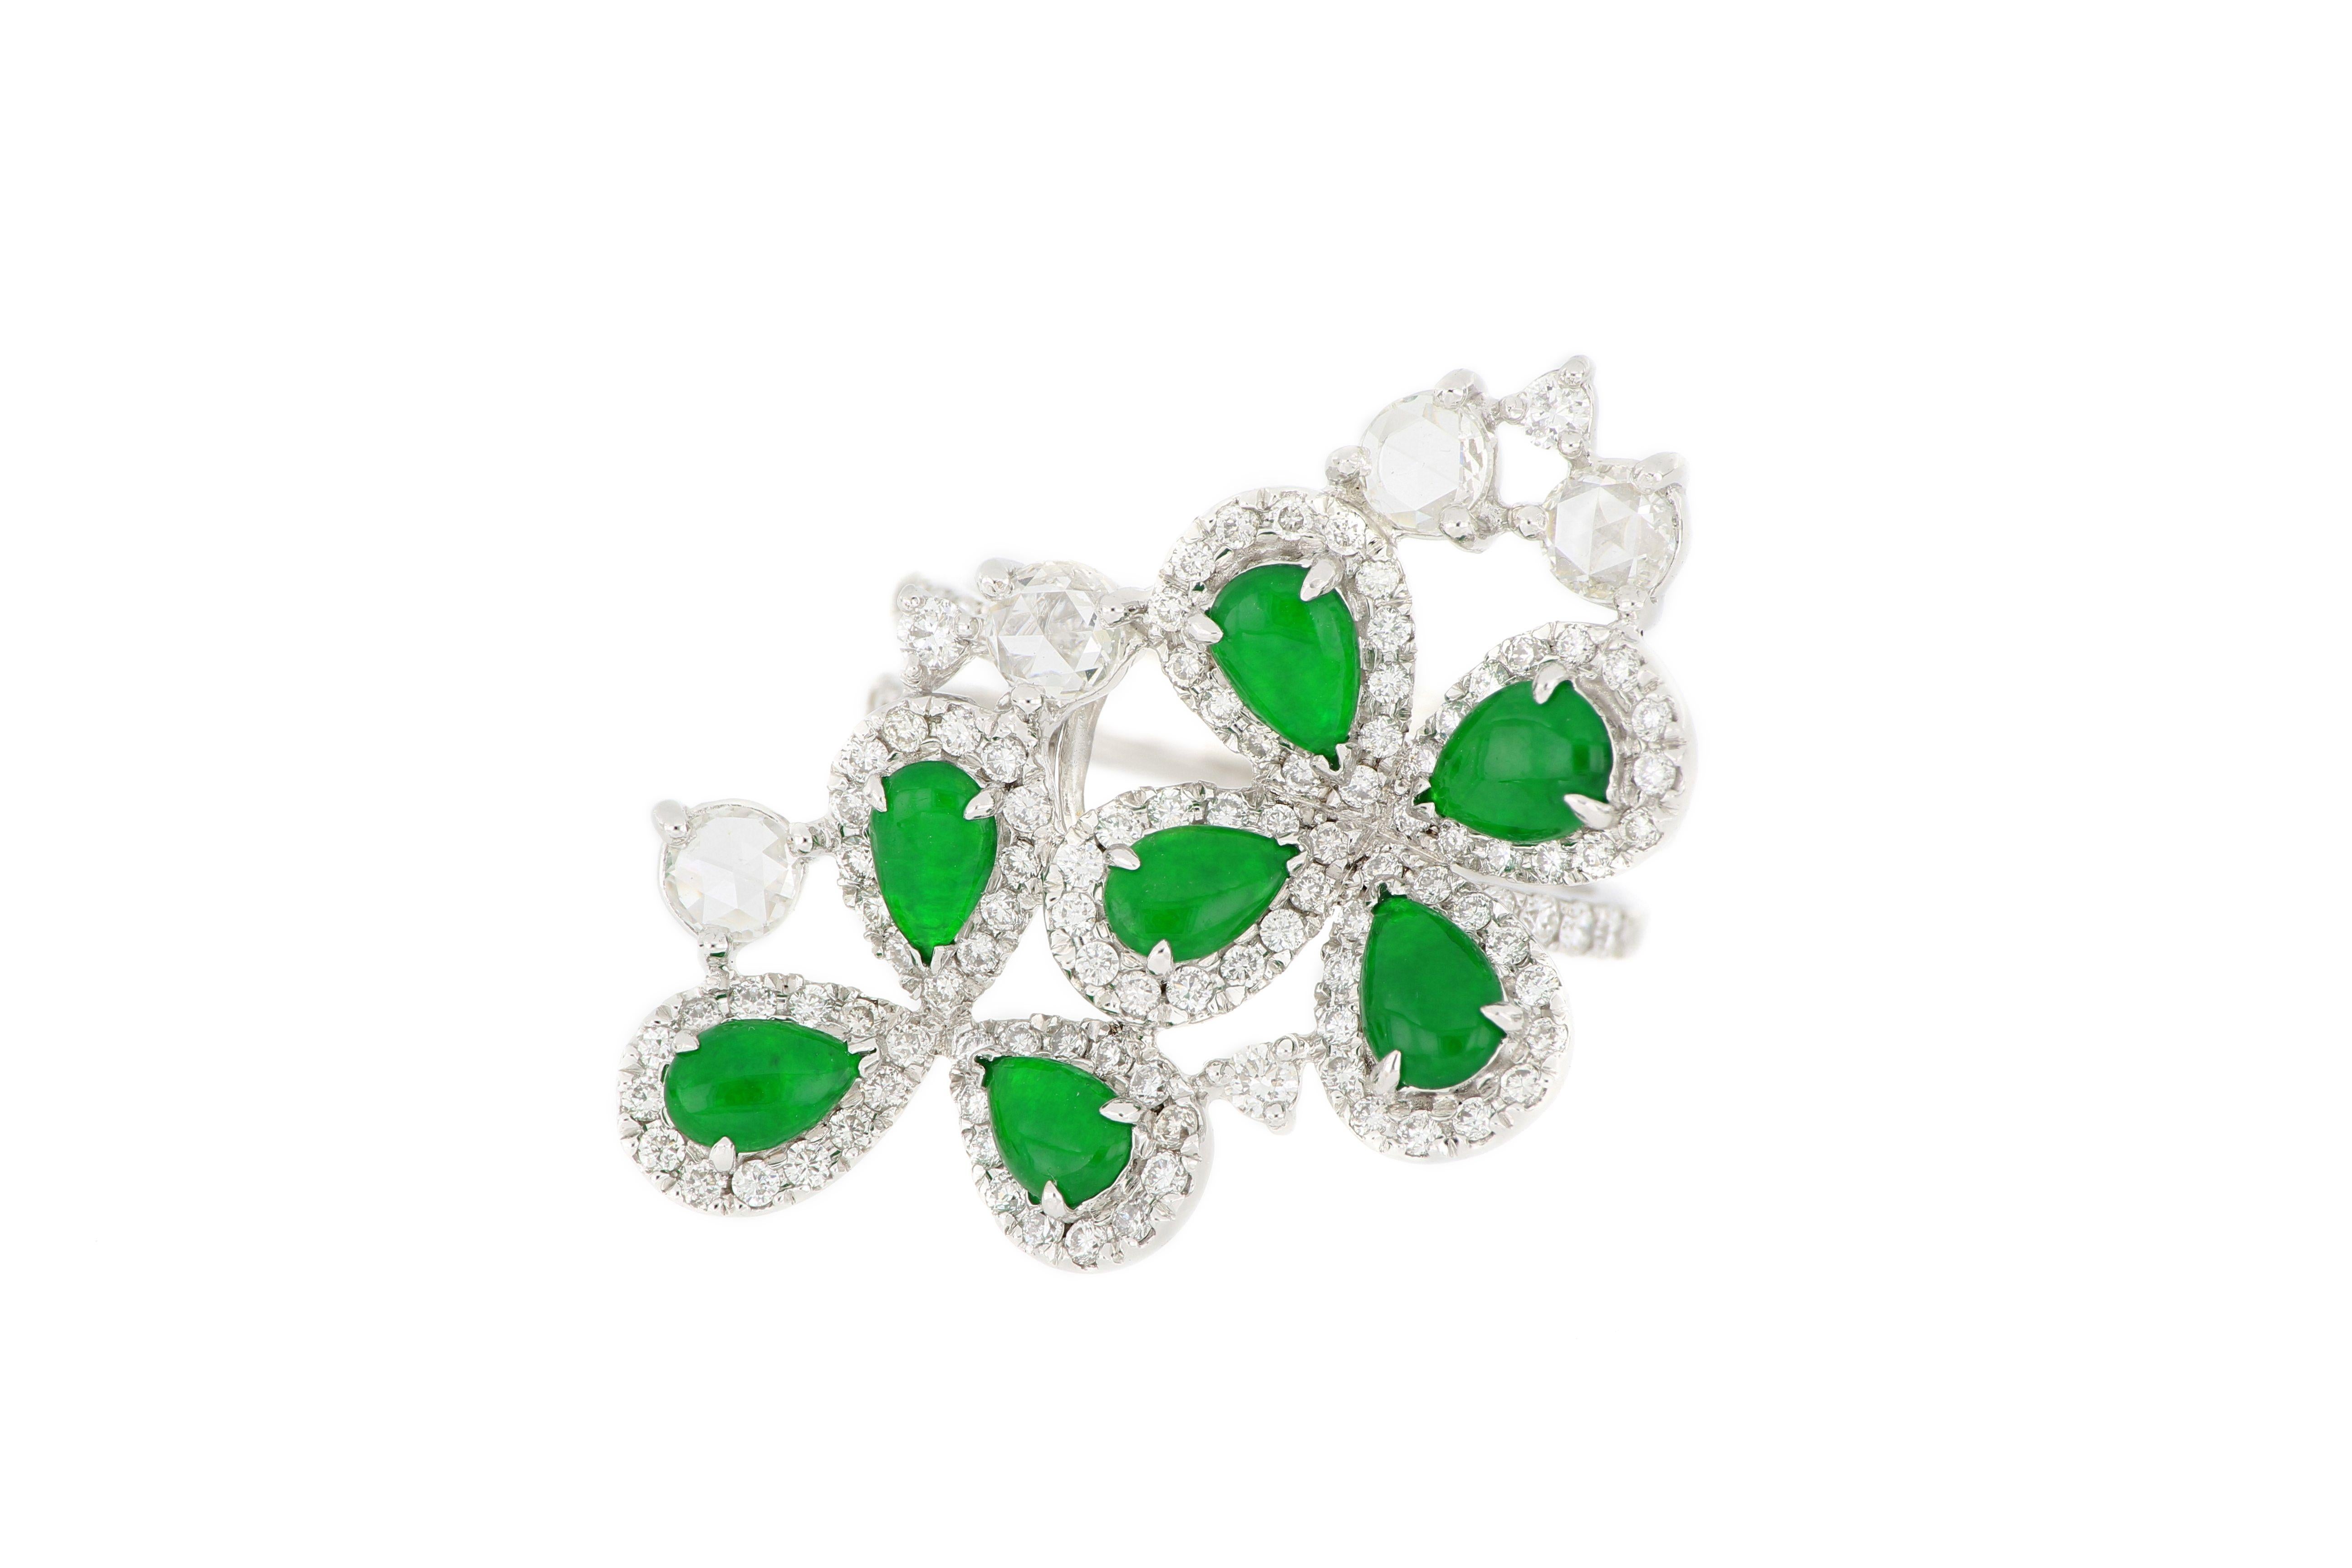 18 Karat White Gold Jadeite and Diamond Ring. The ring consists of 7 pieces of pear-shaped natural imperial Jadeite with very good translucency and vivid bright green colour,  arranged in a floral pattern, decorated with 4 rose-cut diamonds and